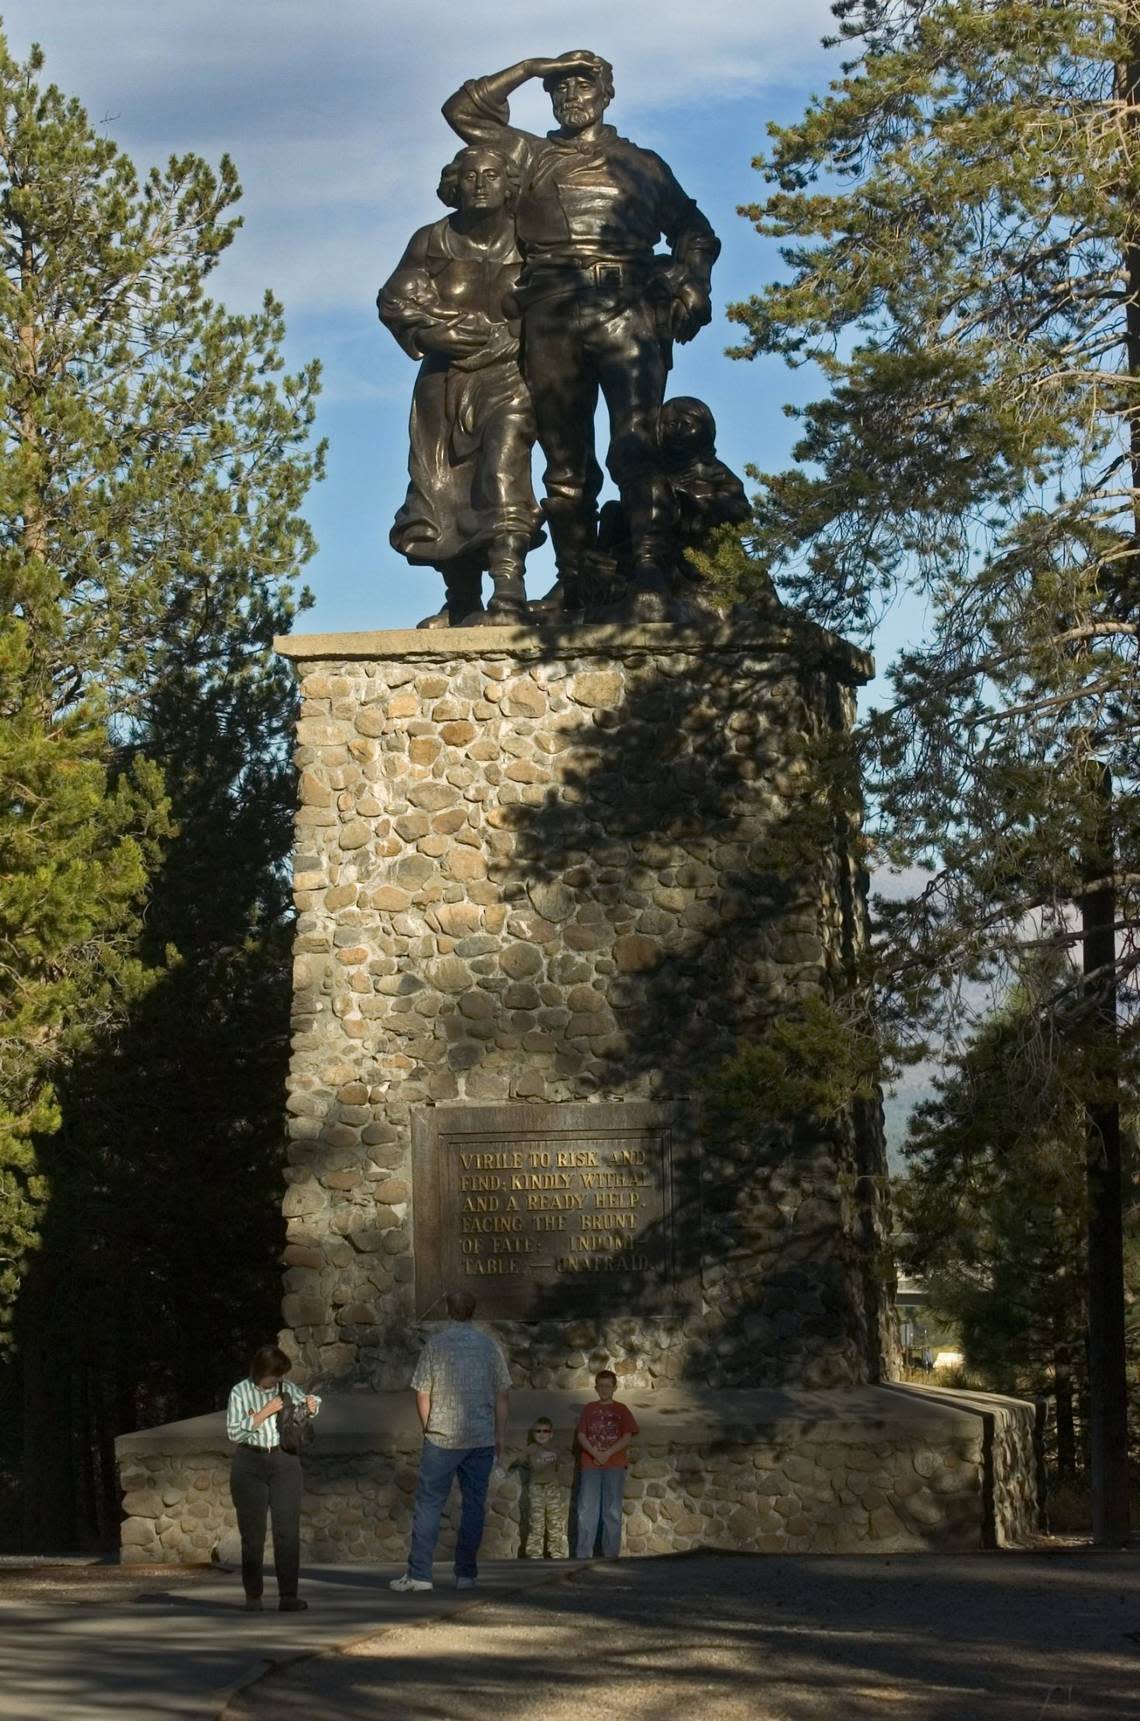 Donner party statue at Donner Memorial State Park in Truckee, Calif.